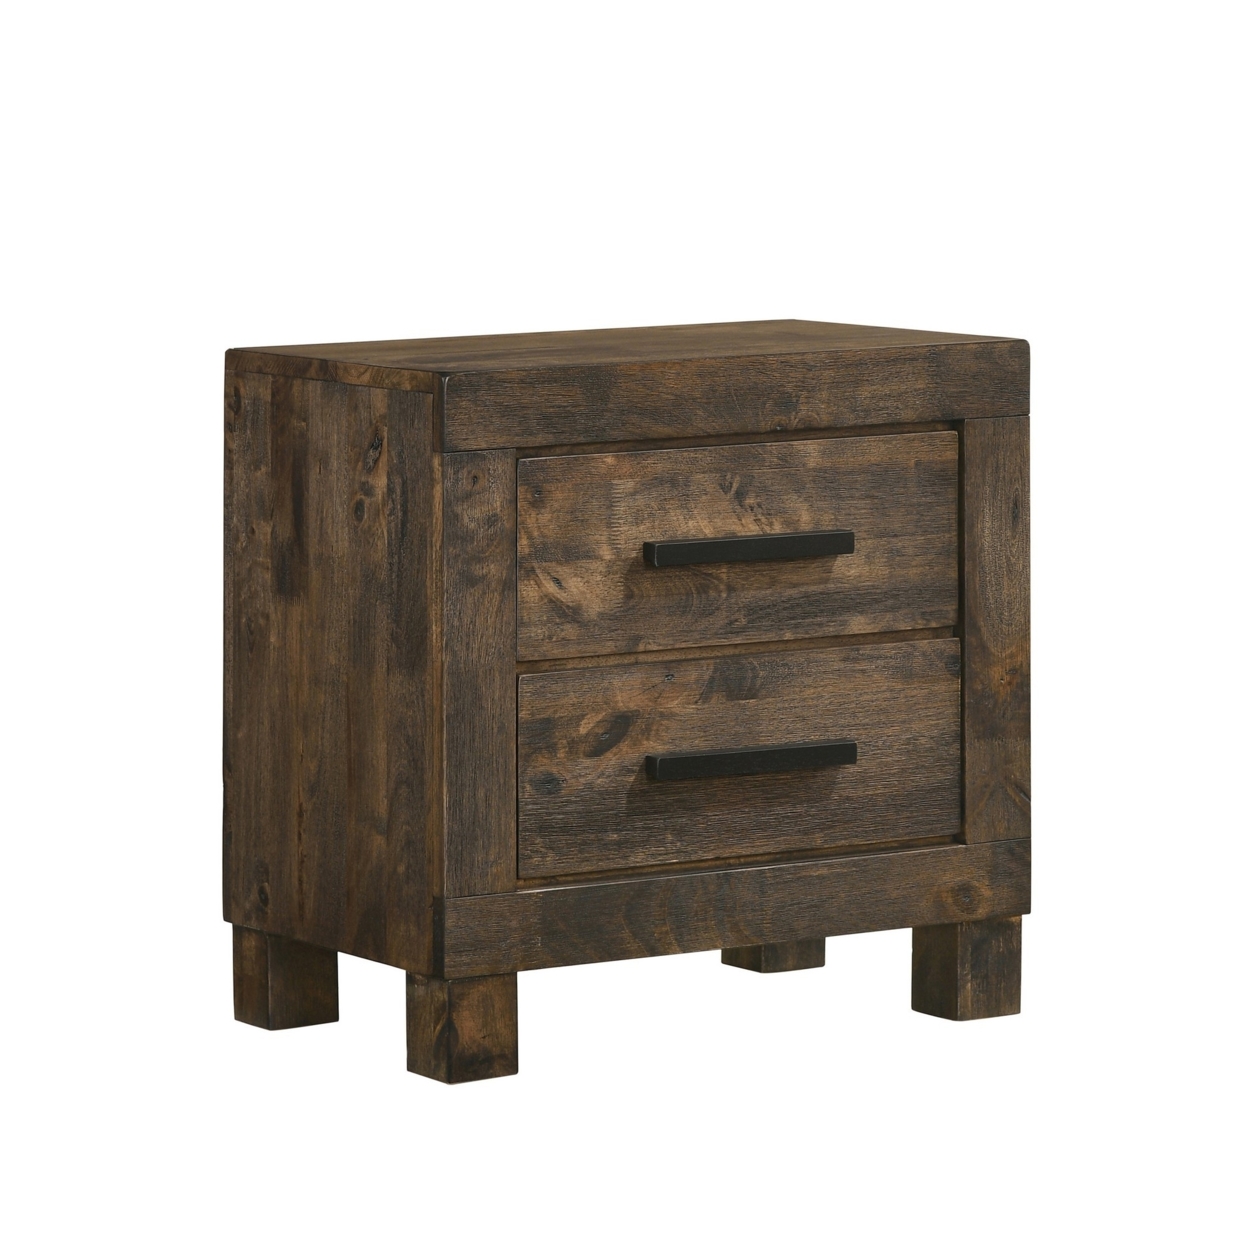 Wooden Nightstand With 2 Drawers And Grain Details, Brown- Saltoro Sherpi